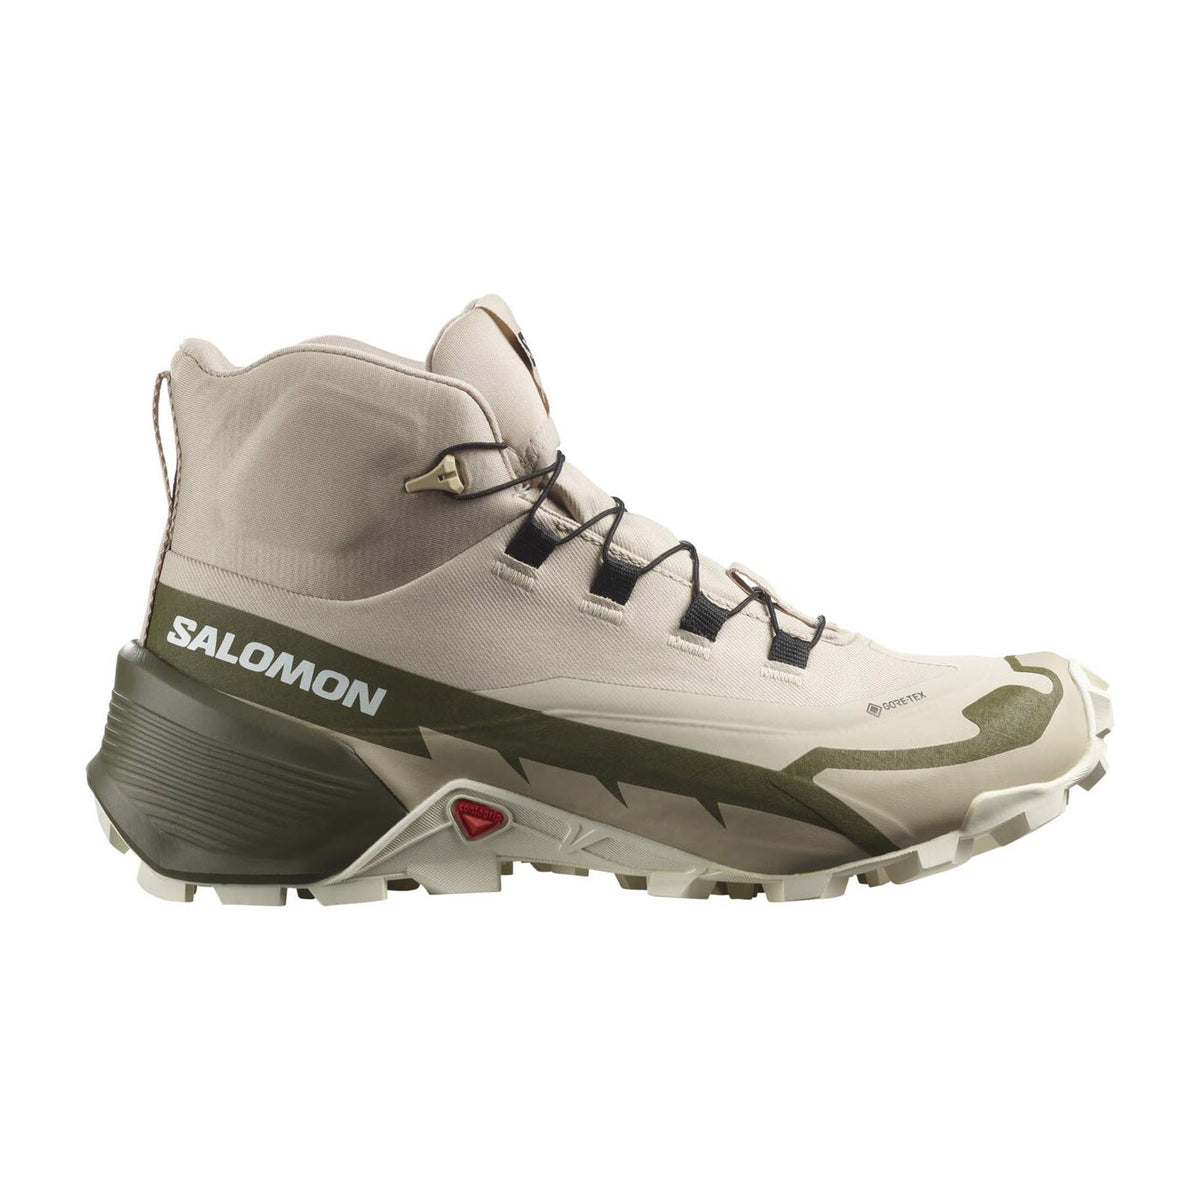 A single beige and green Salomon CROSS HIKE 2 MID GTX SHALE/WILD - WOMENS hiking shoe with a high ankle design, displayed against a white background.